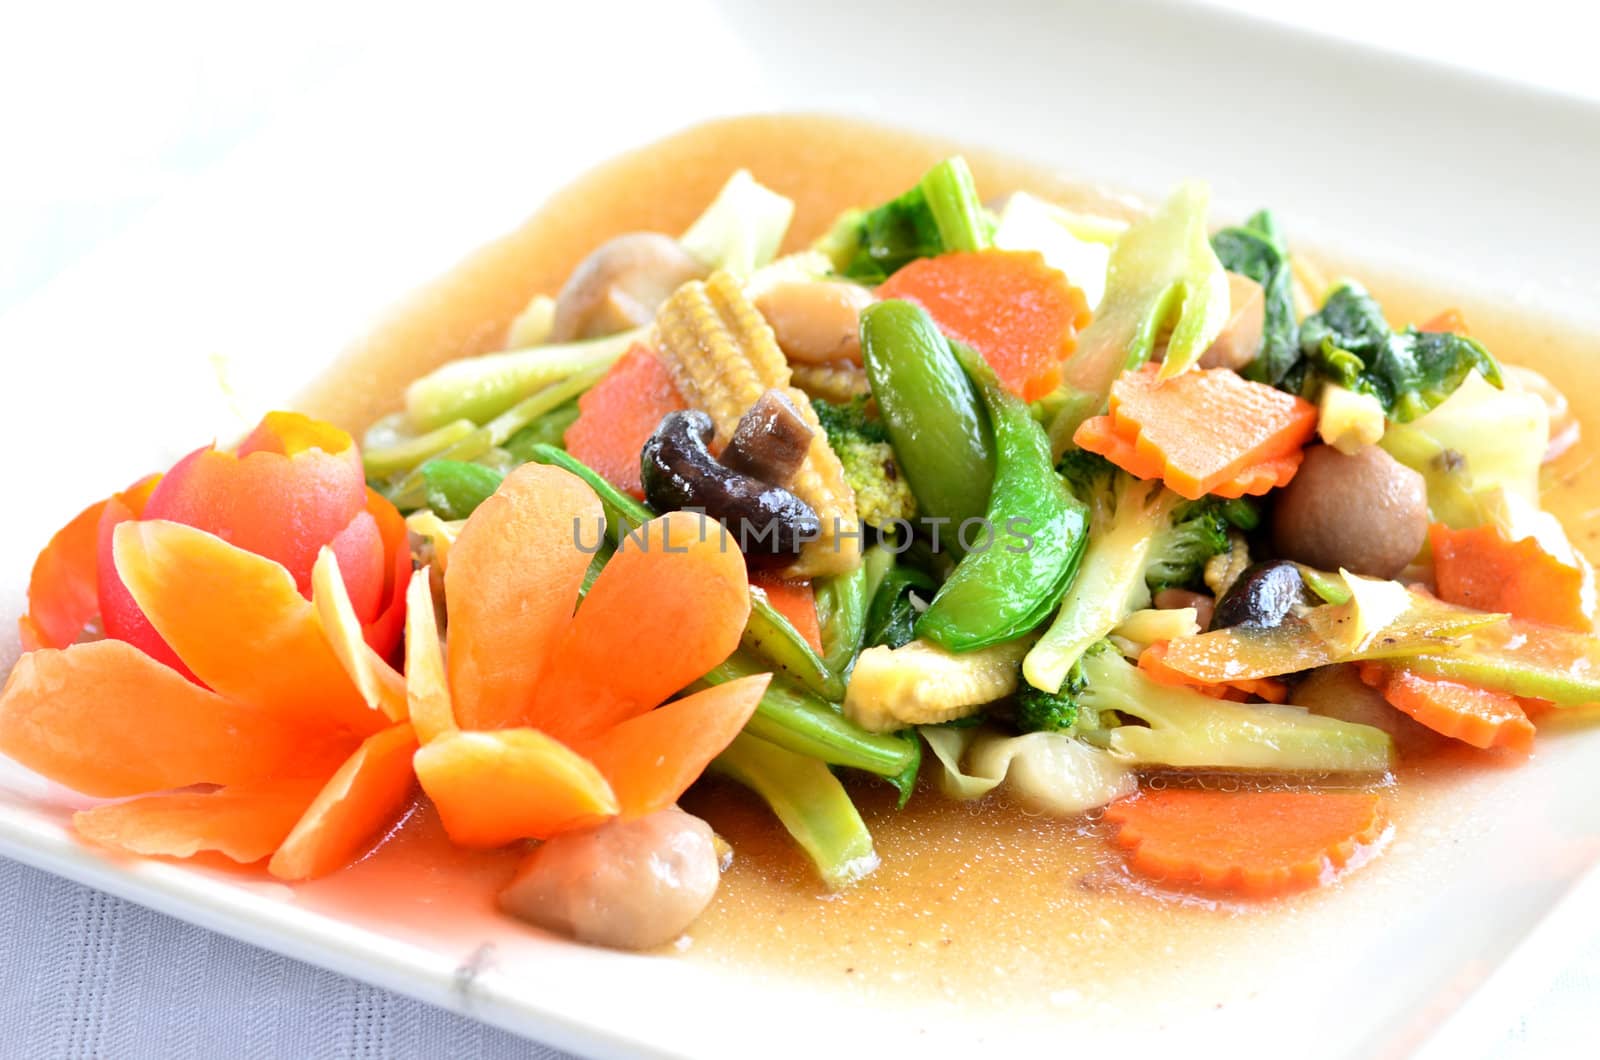 Sauted mixed vegetables in oyster sauce